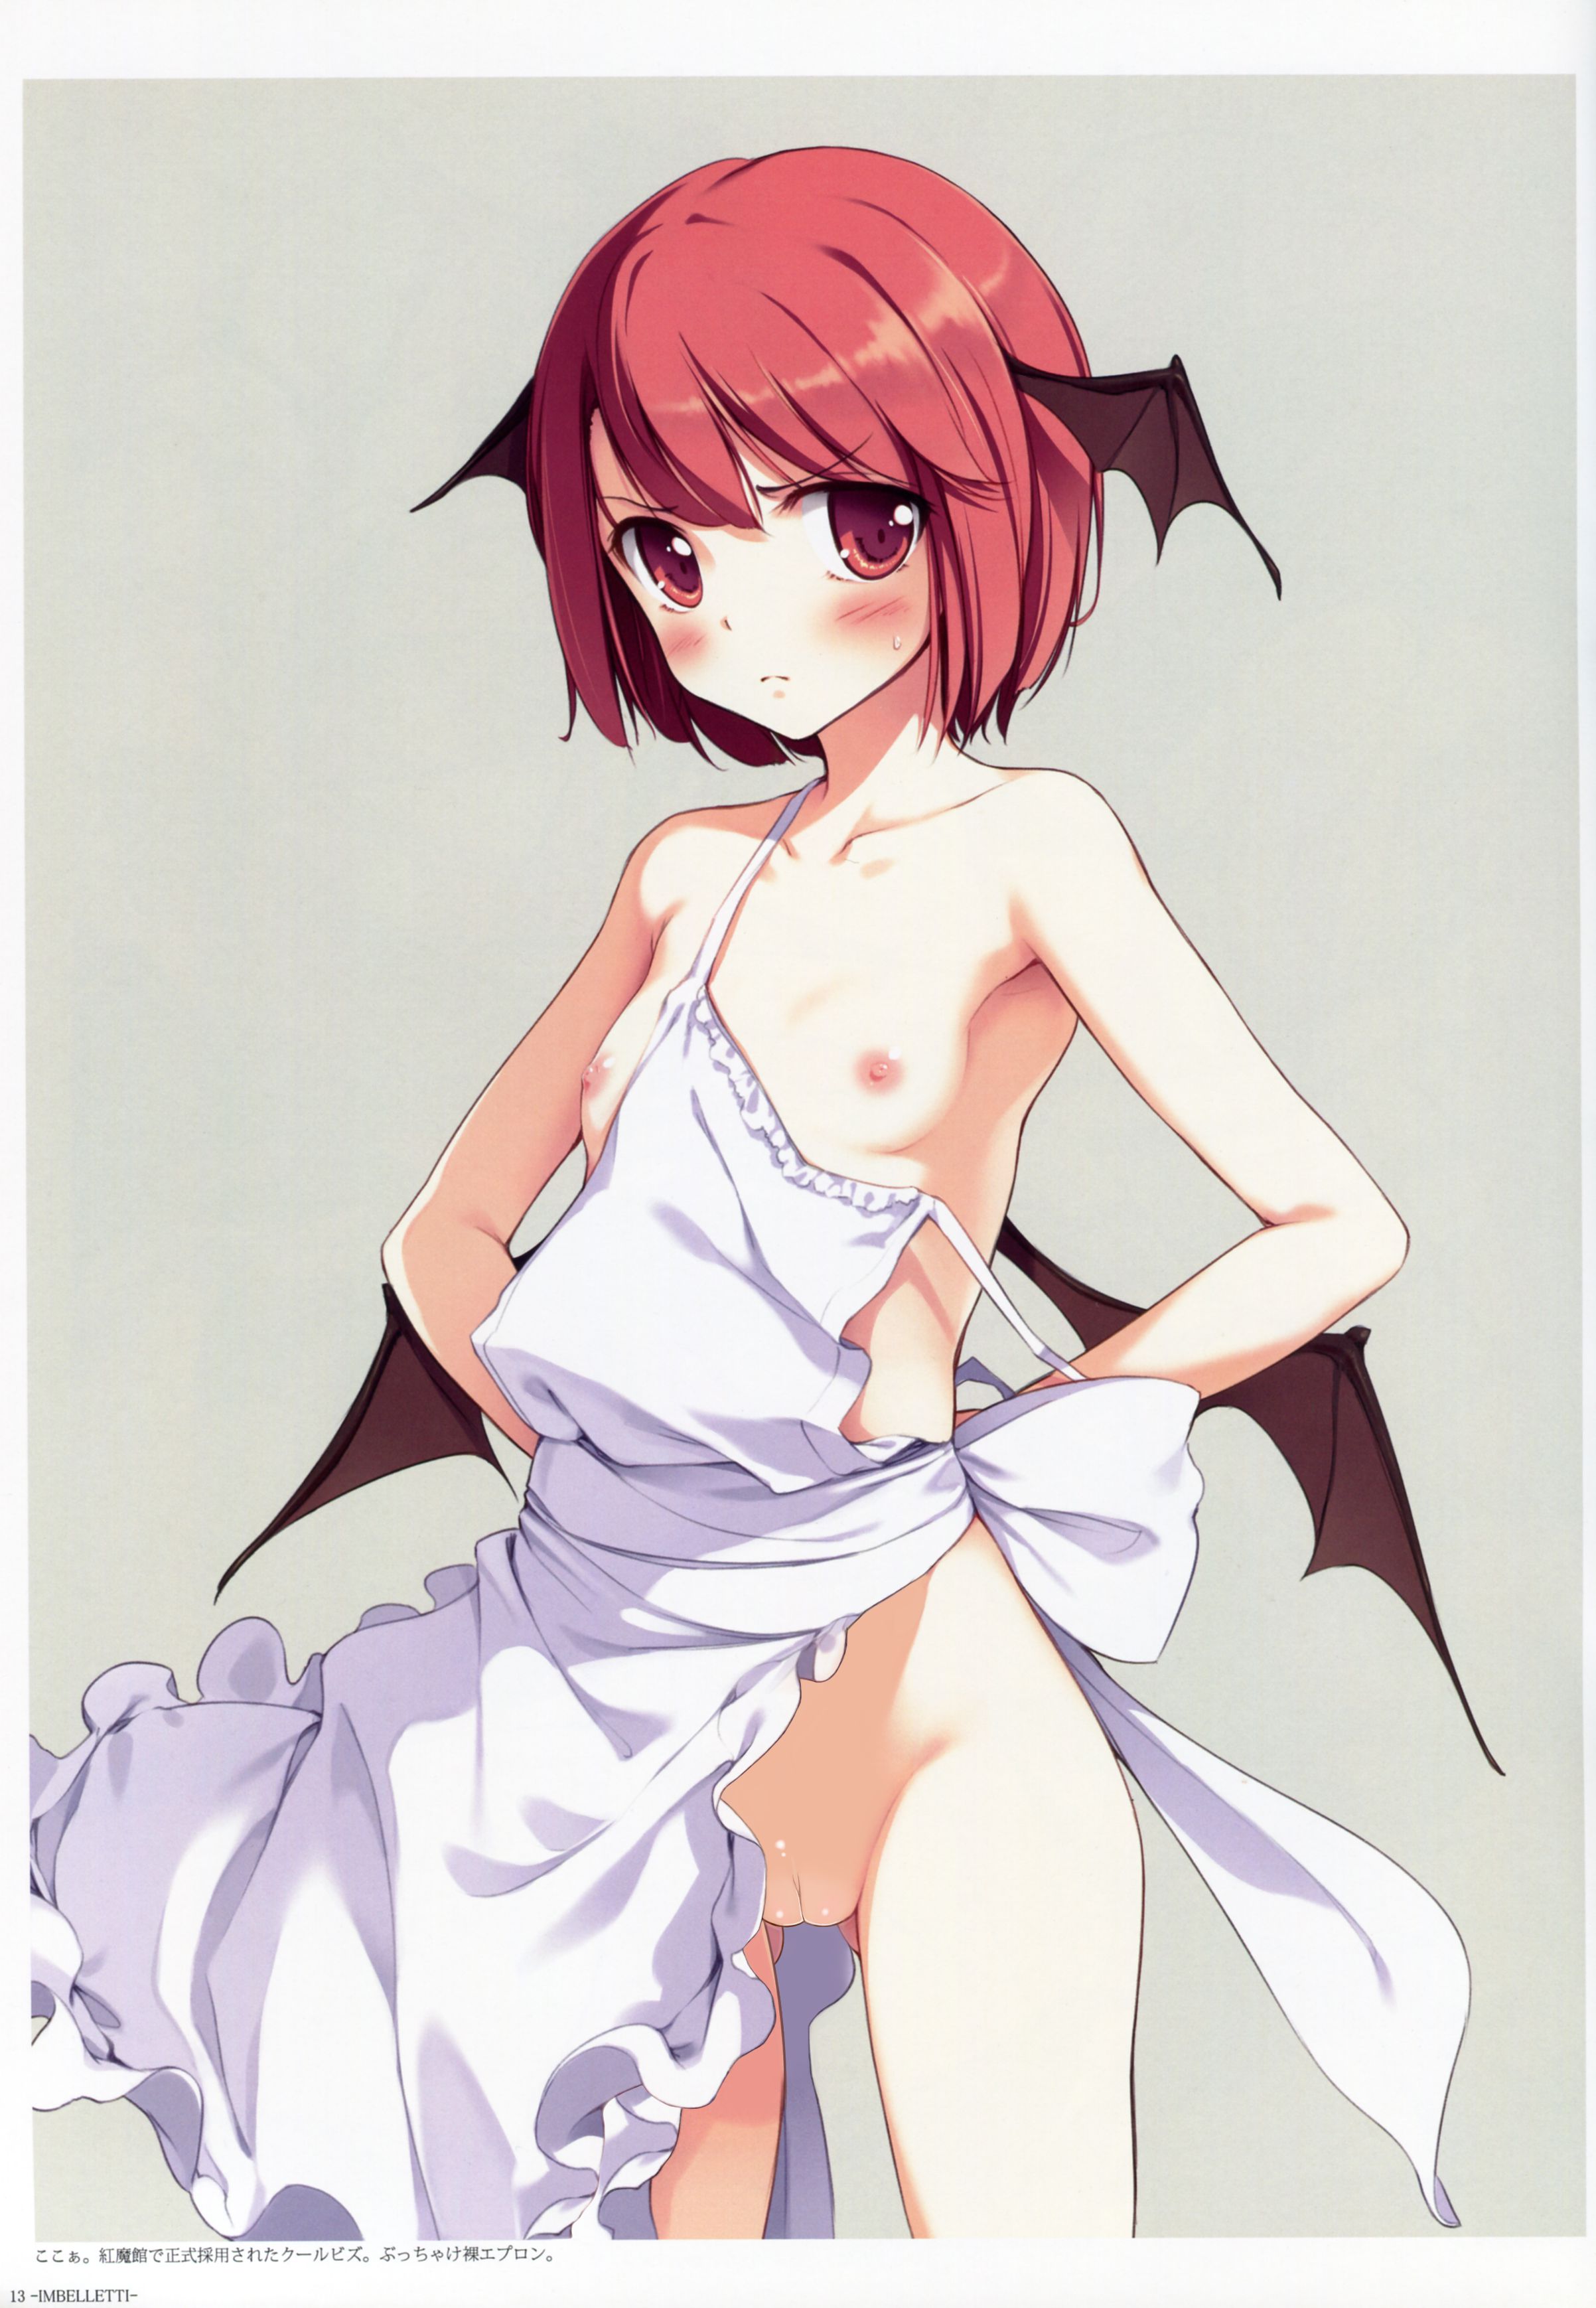 [Stripped Kora] a large amount of stripped Kora image, such as anime official picture part 362 38